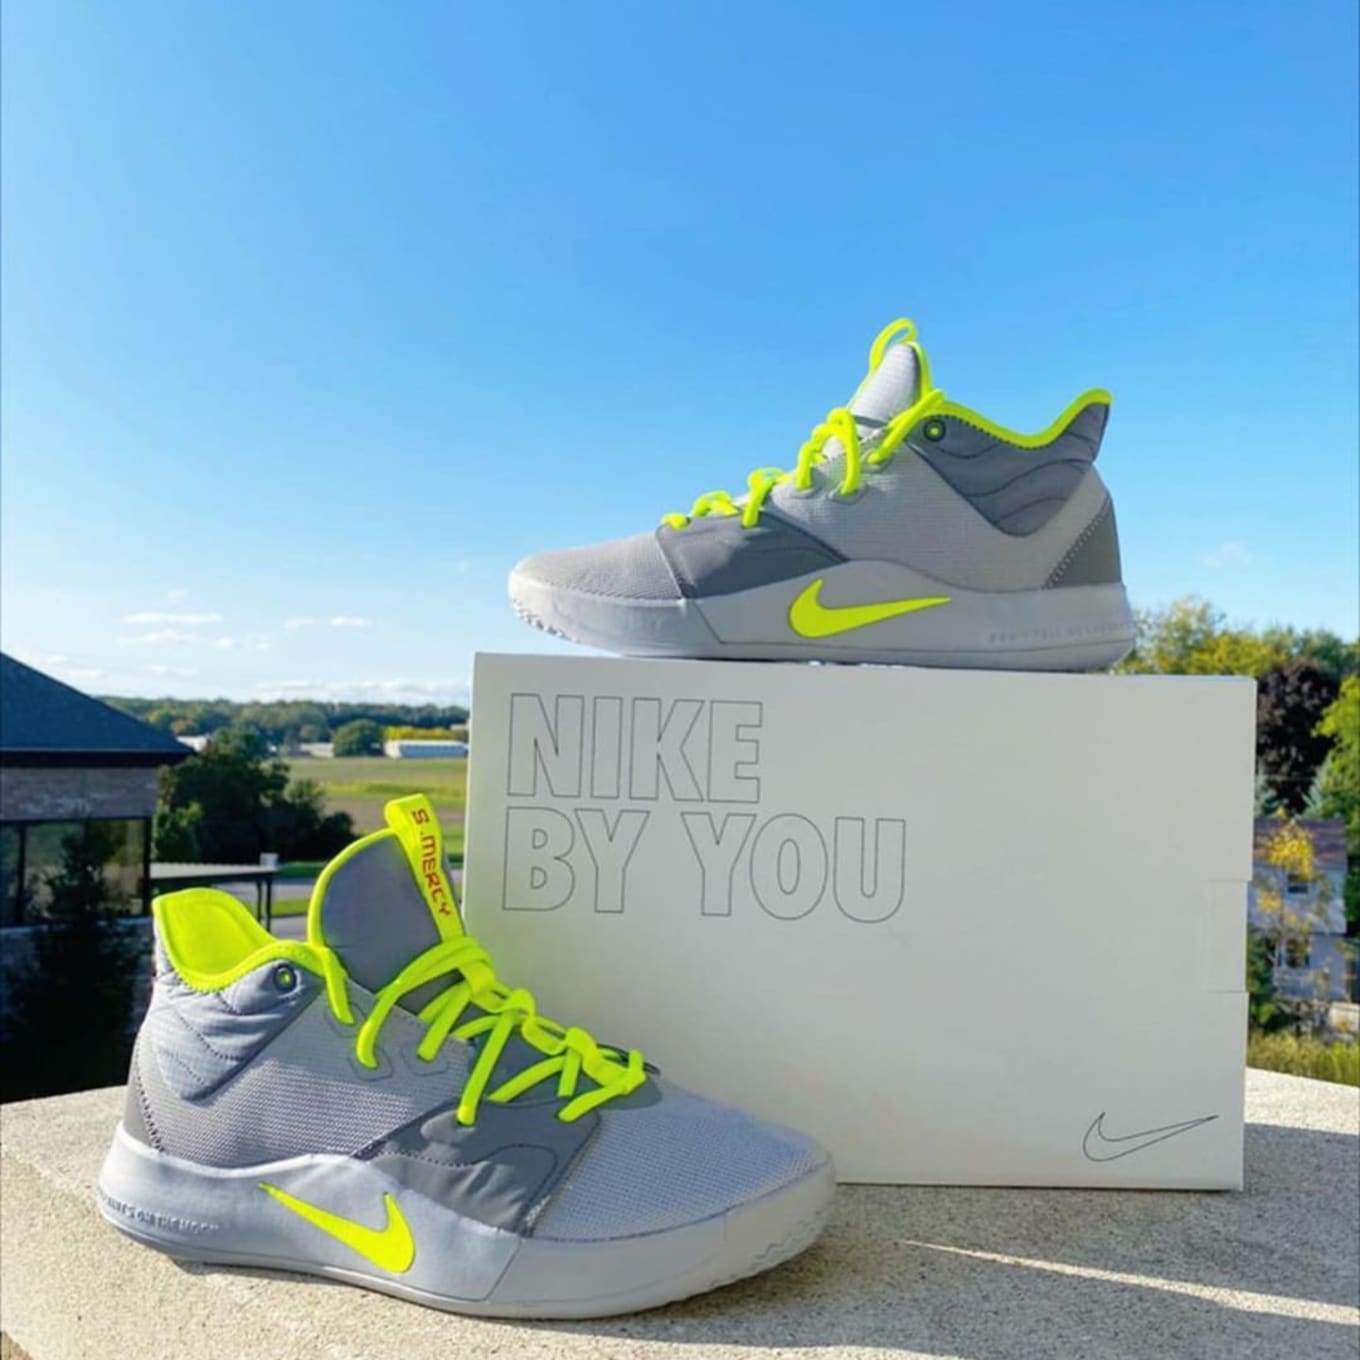 Nike By You PG3 iD Designs | Sole Collector